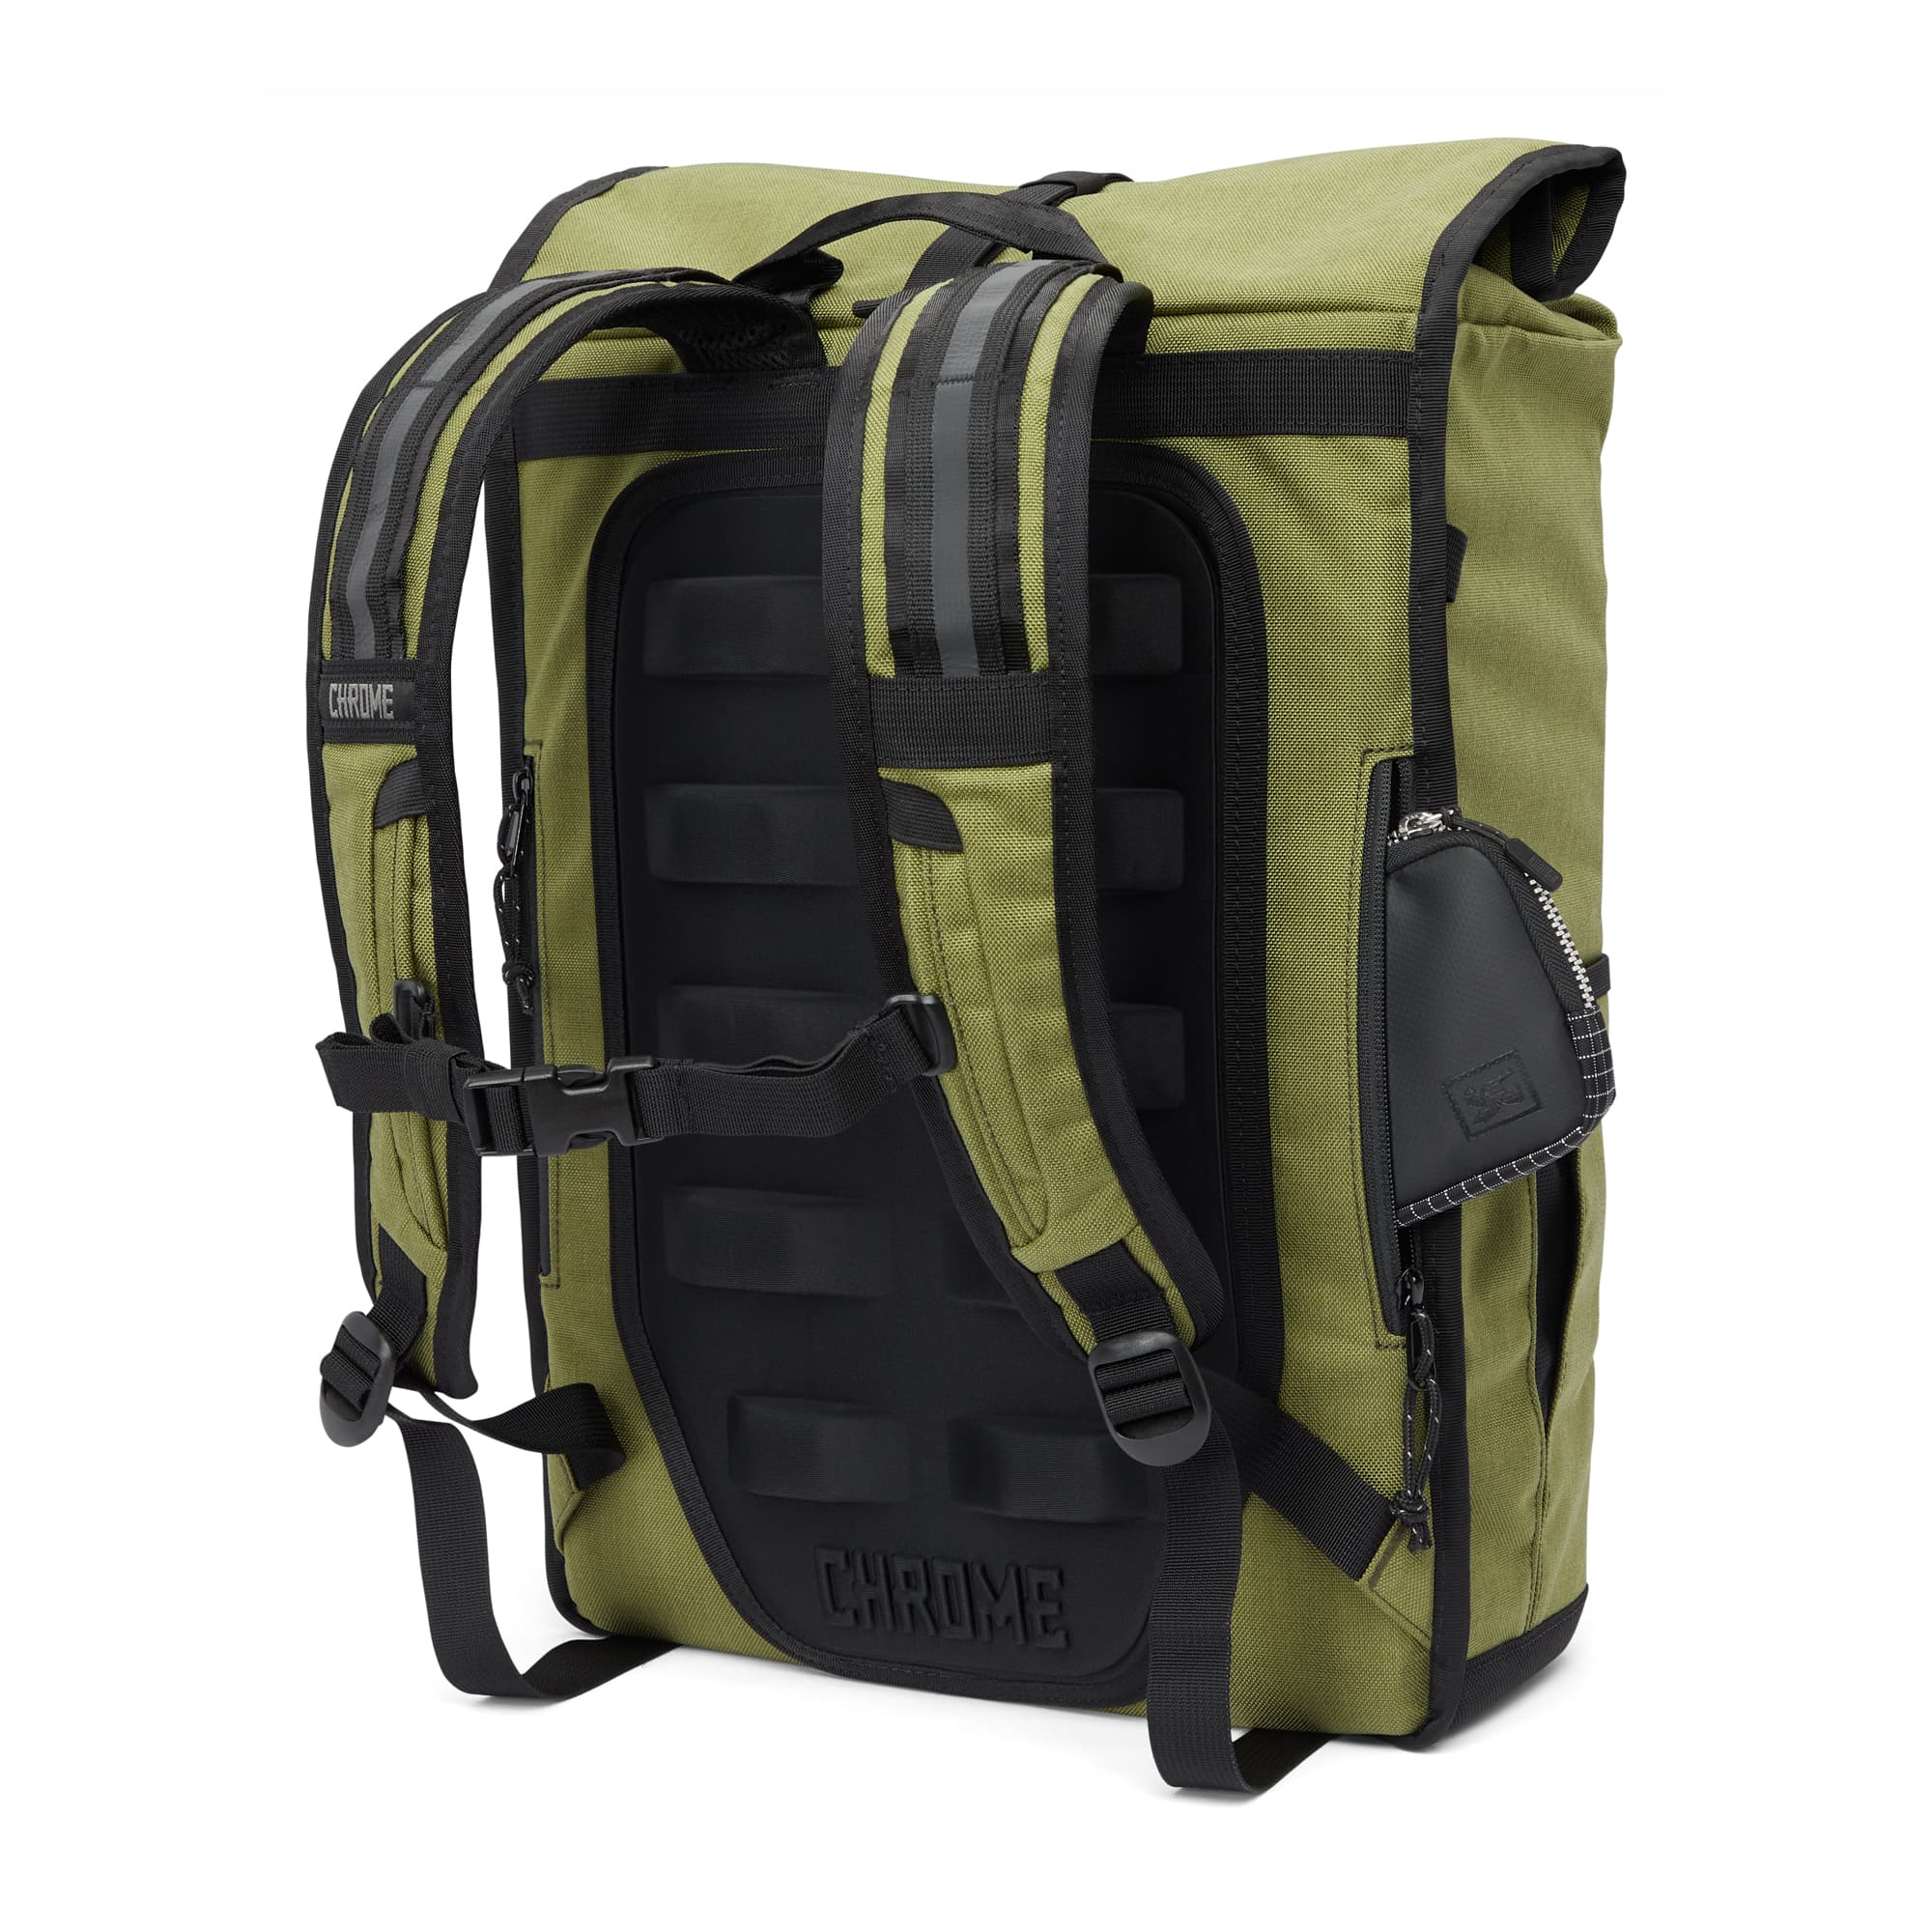 35L Bravo 3.0 Backpack in green harness detail #color_olive branch